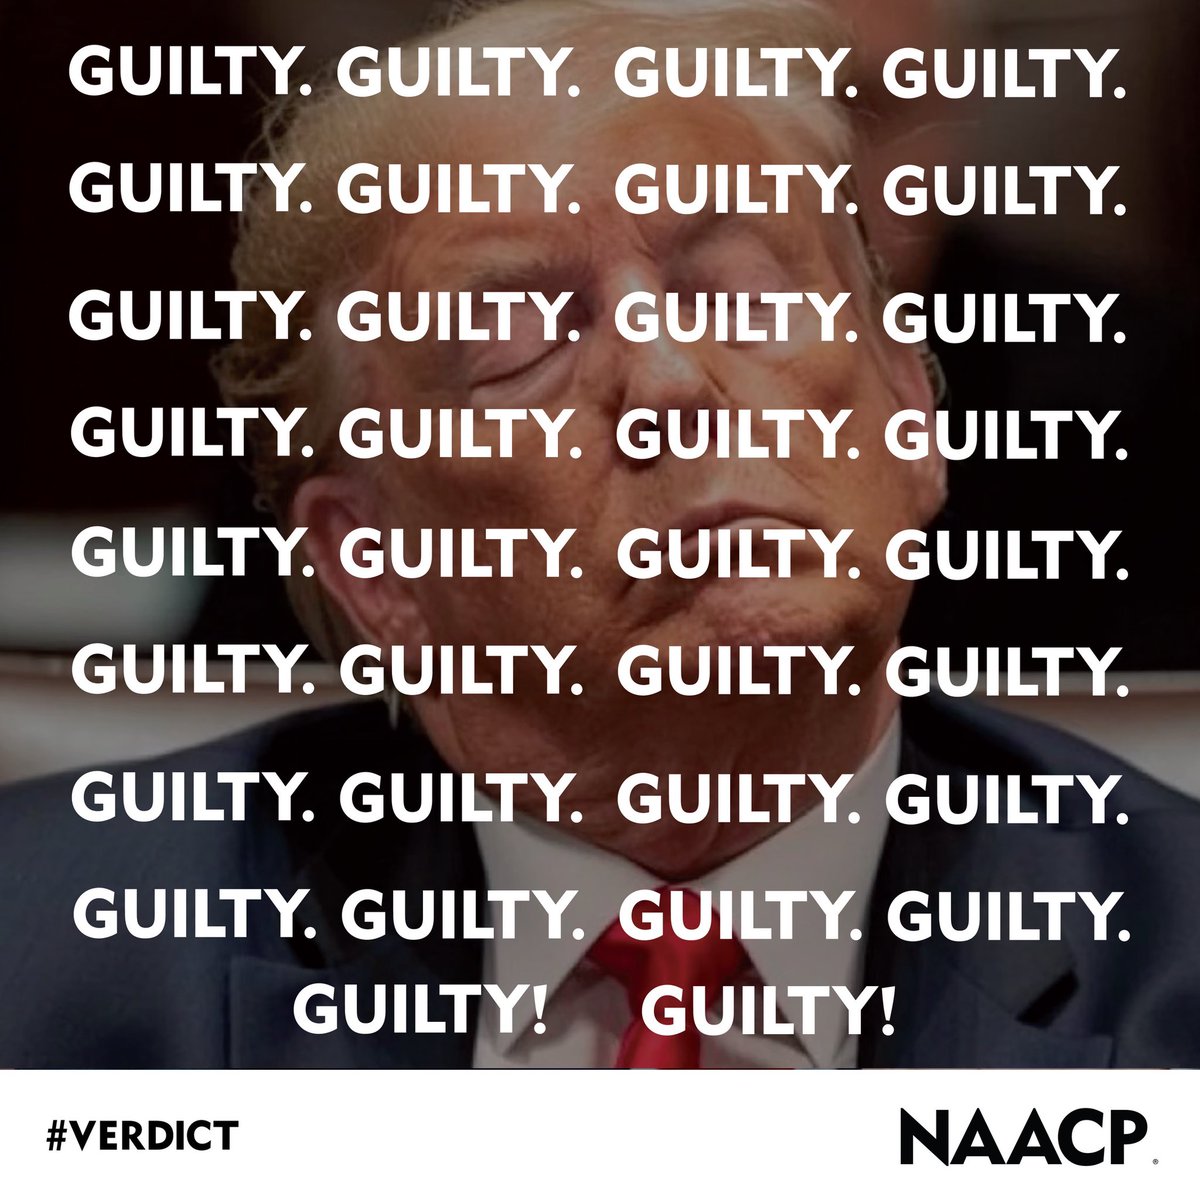 Guilty on all 34 counts. #Verdict